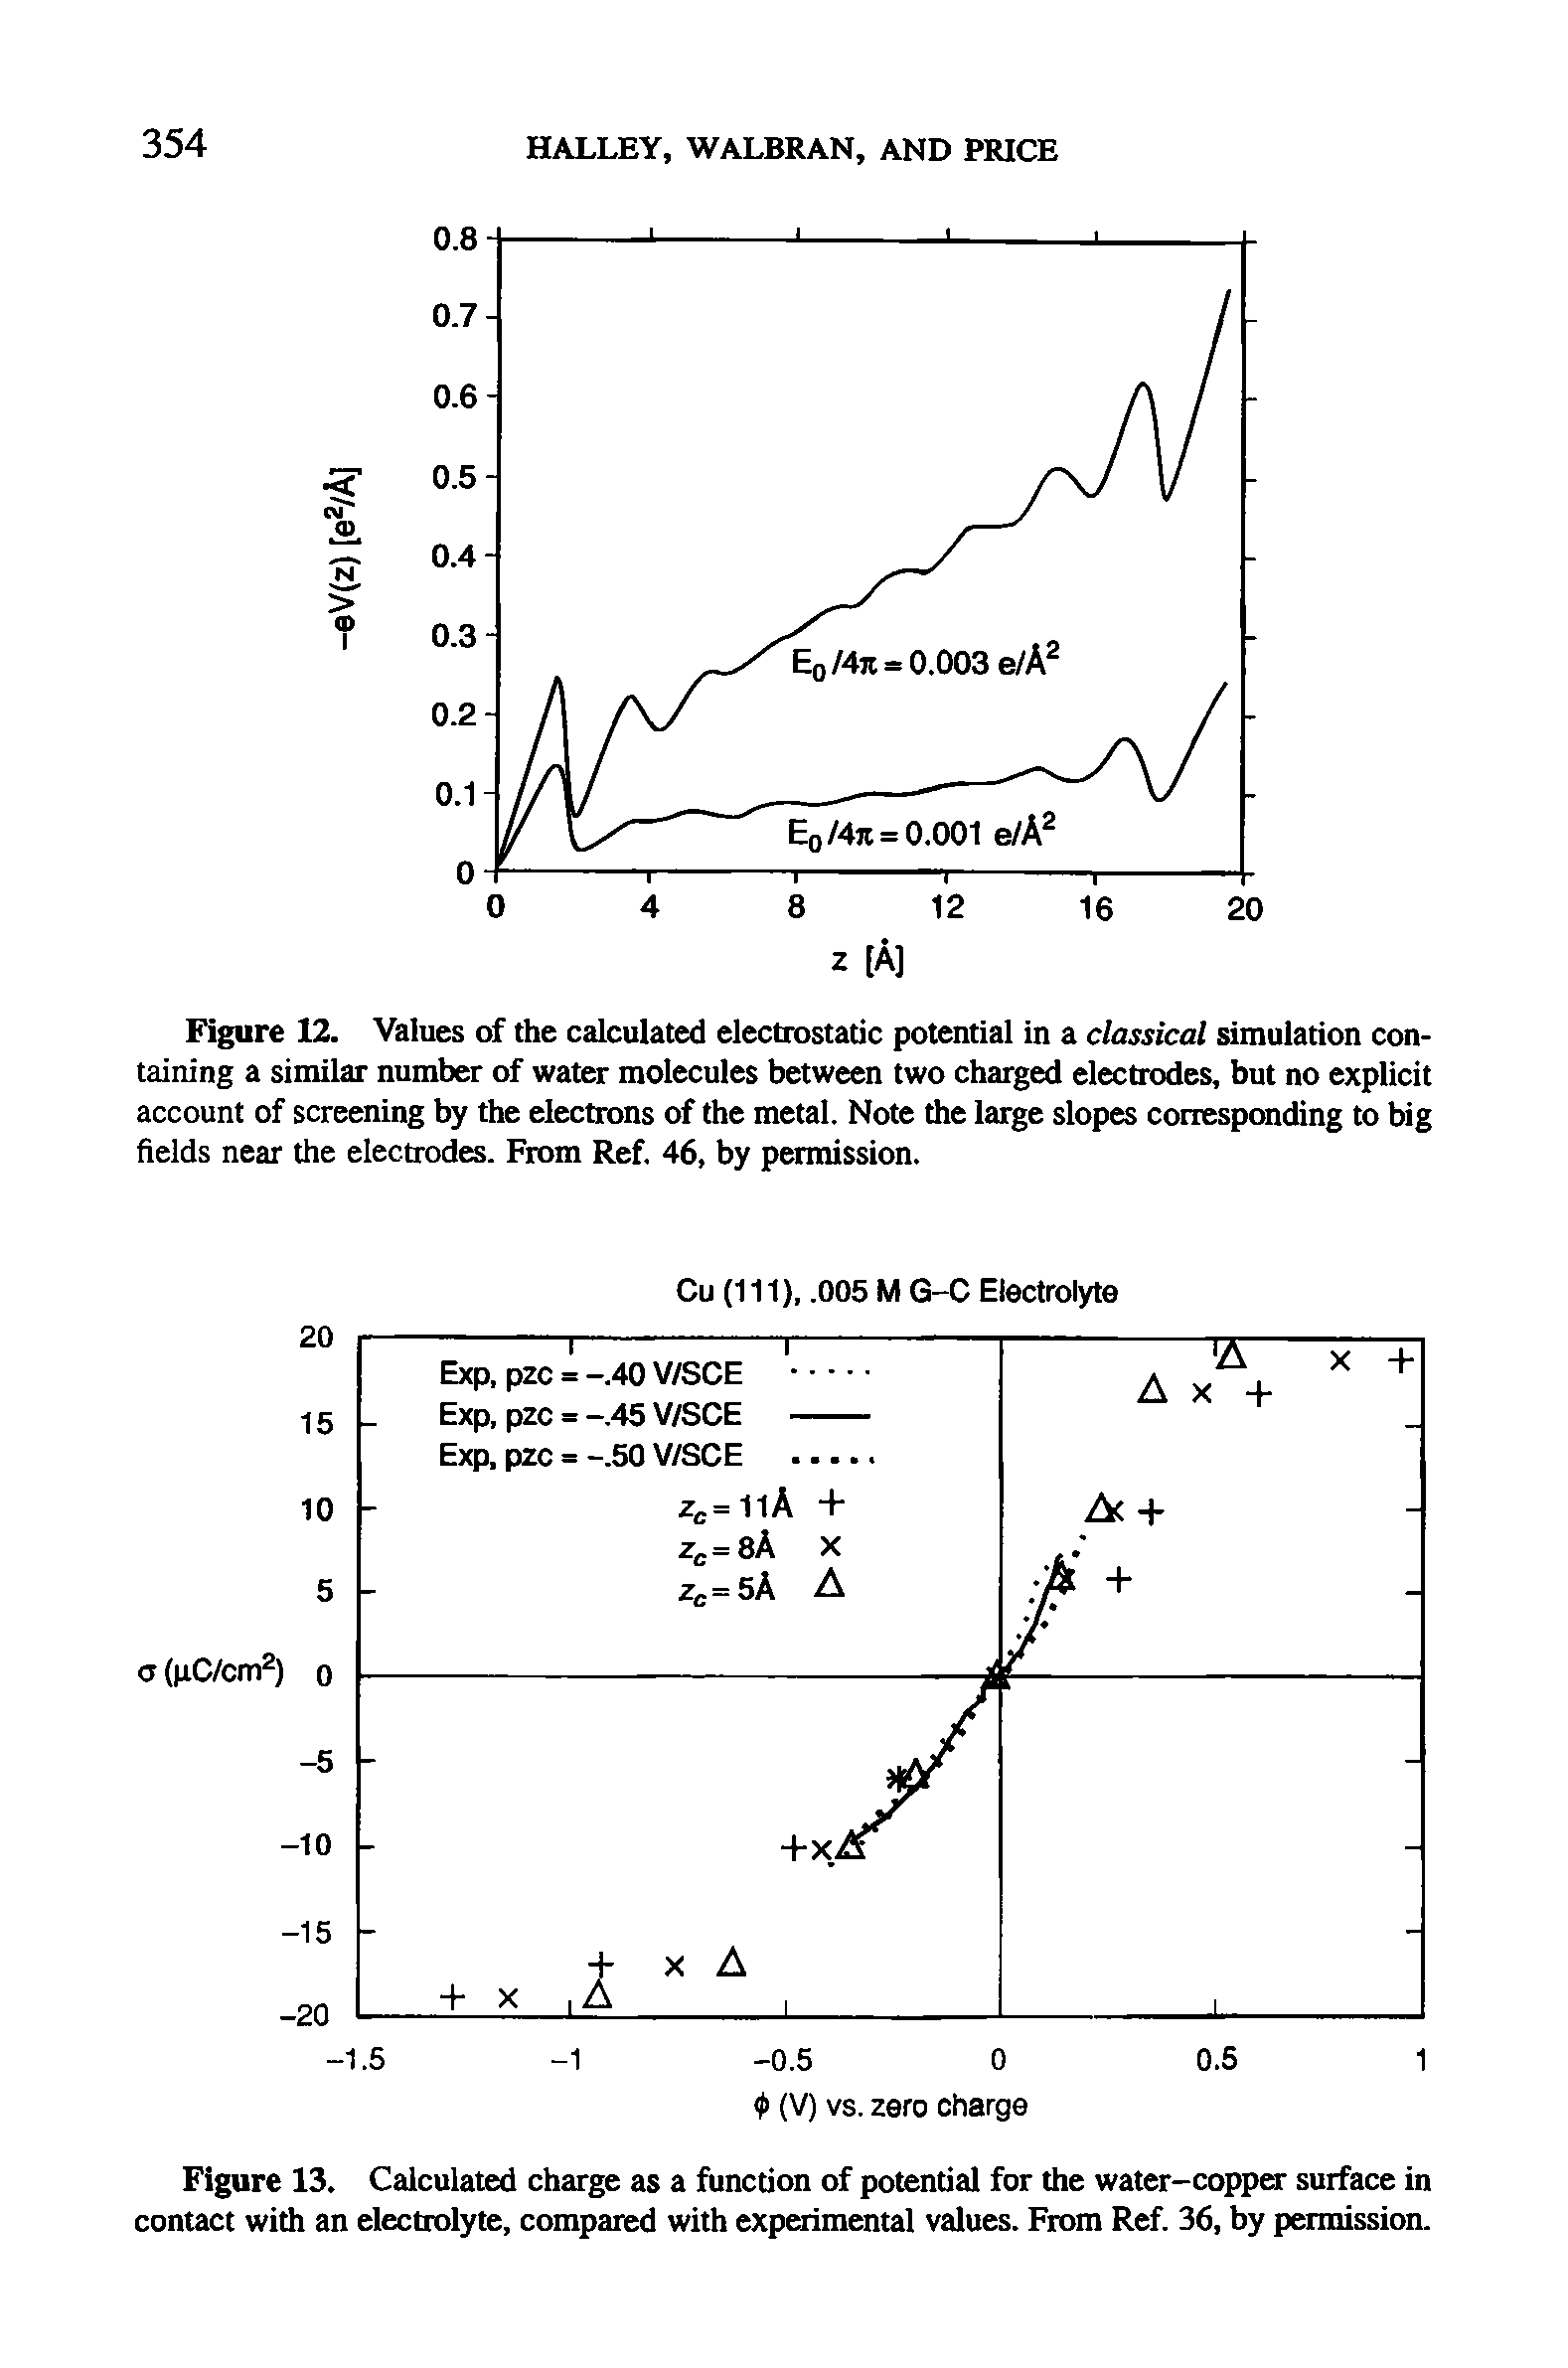 Figure 13. Calculated charge as a function of potential for the water-copper surface in contact with an electrolyte, compared with experimental values. From Ref. 36, by permission.